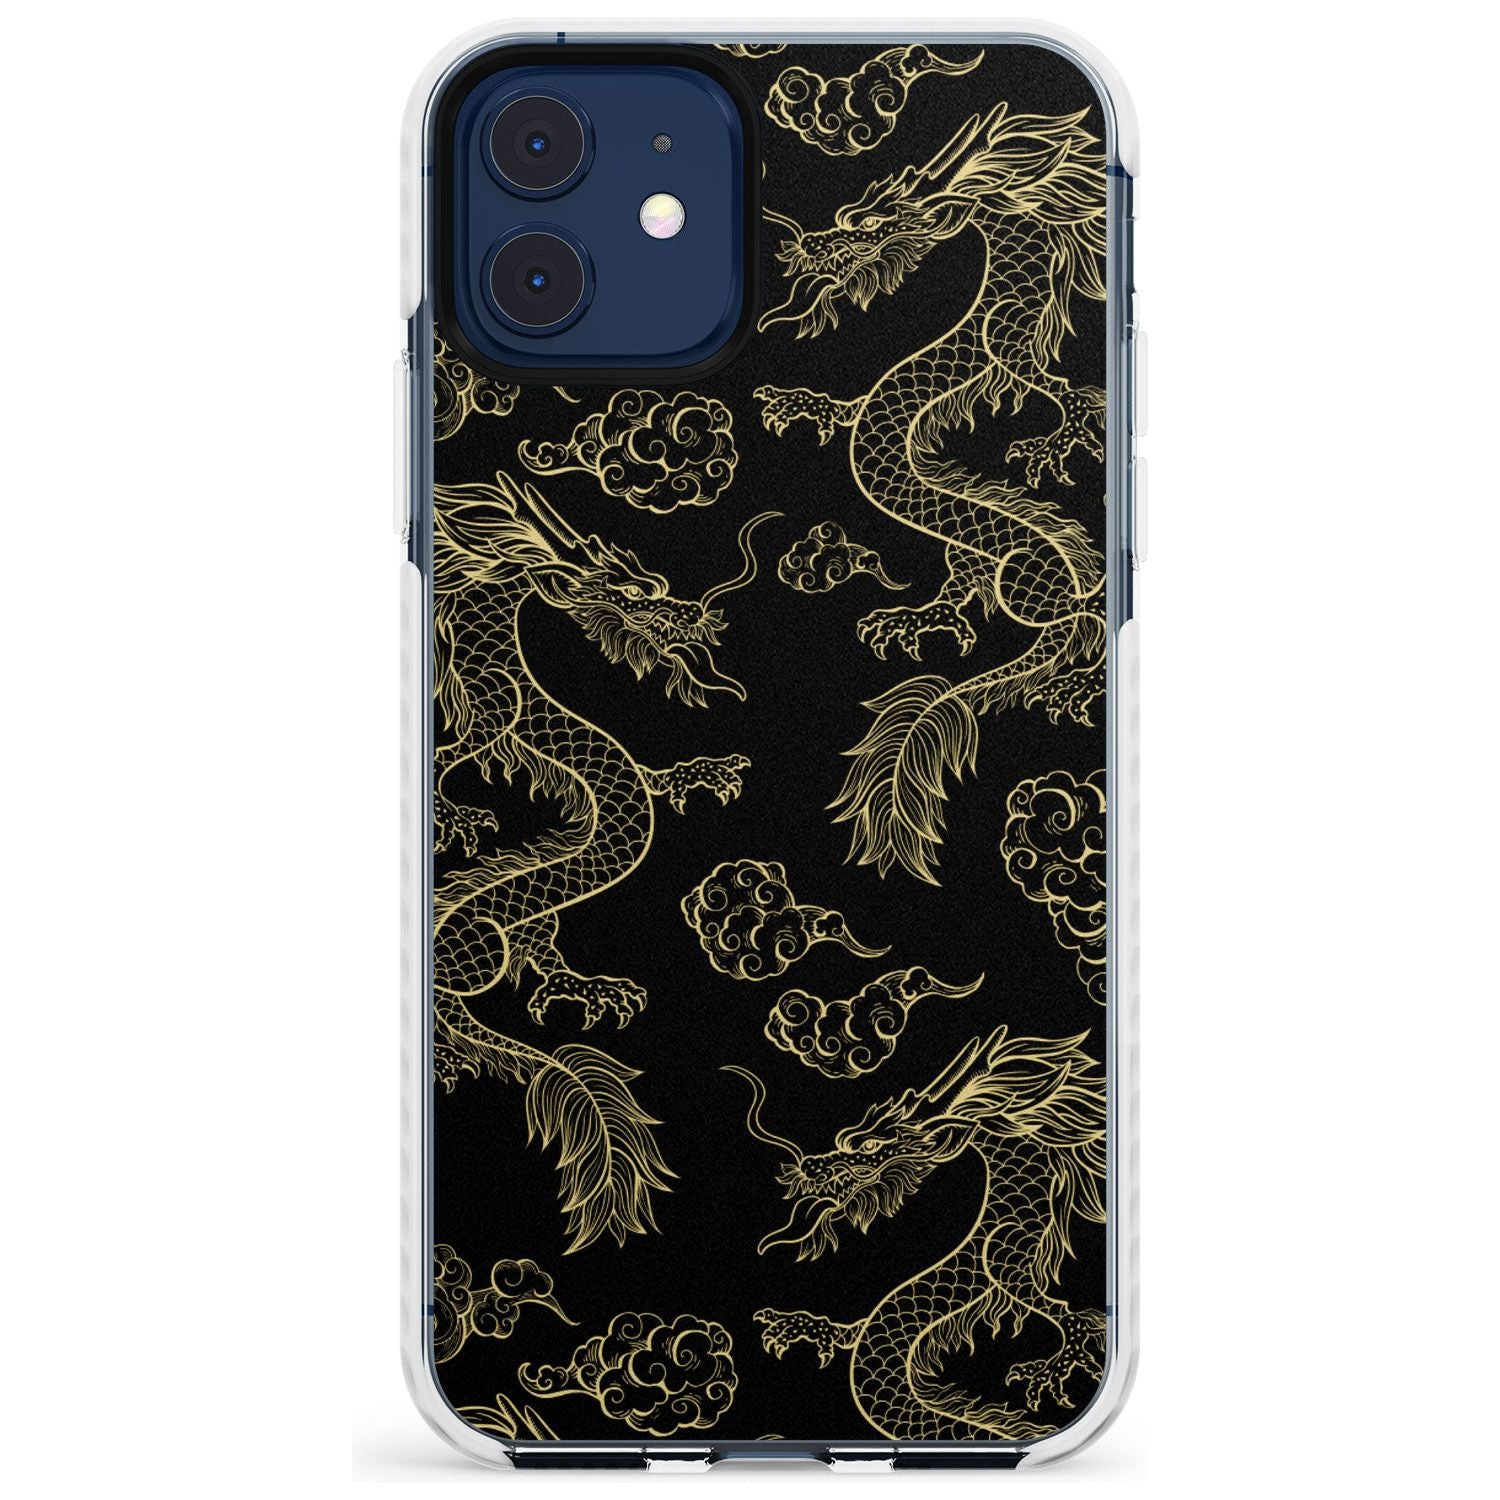 Black and Gold Dragon Pattern Impact Phone Case for iPhone 11